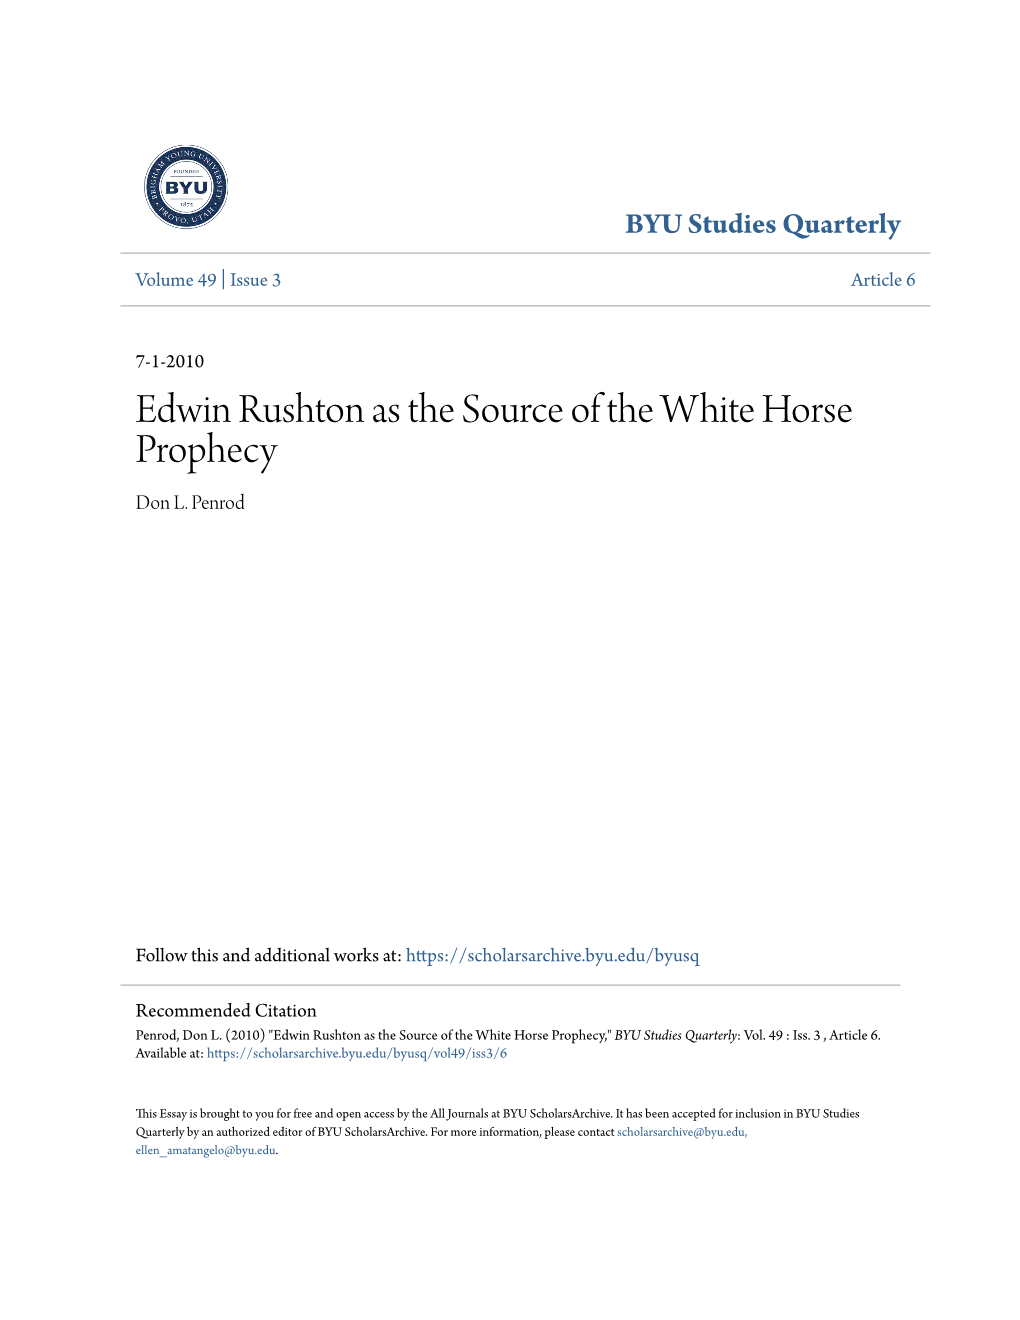 Edwin Rushton As the Source of the White Horse Prophecy Don L